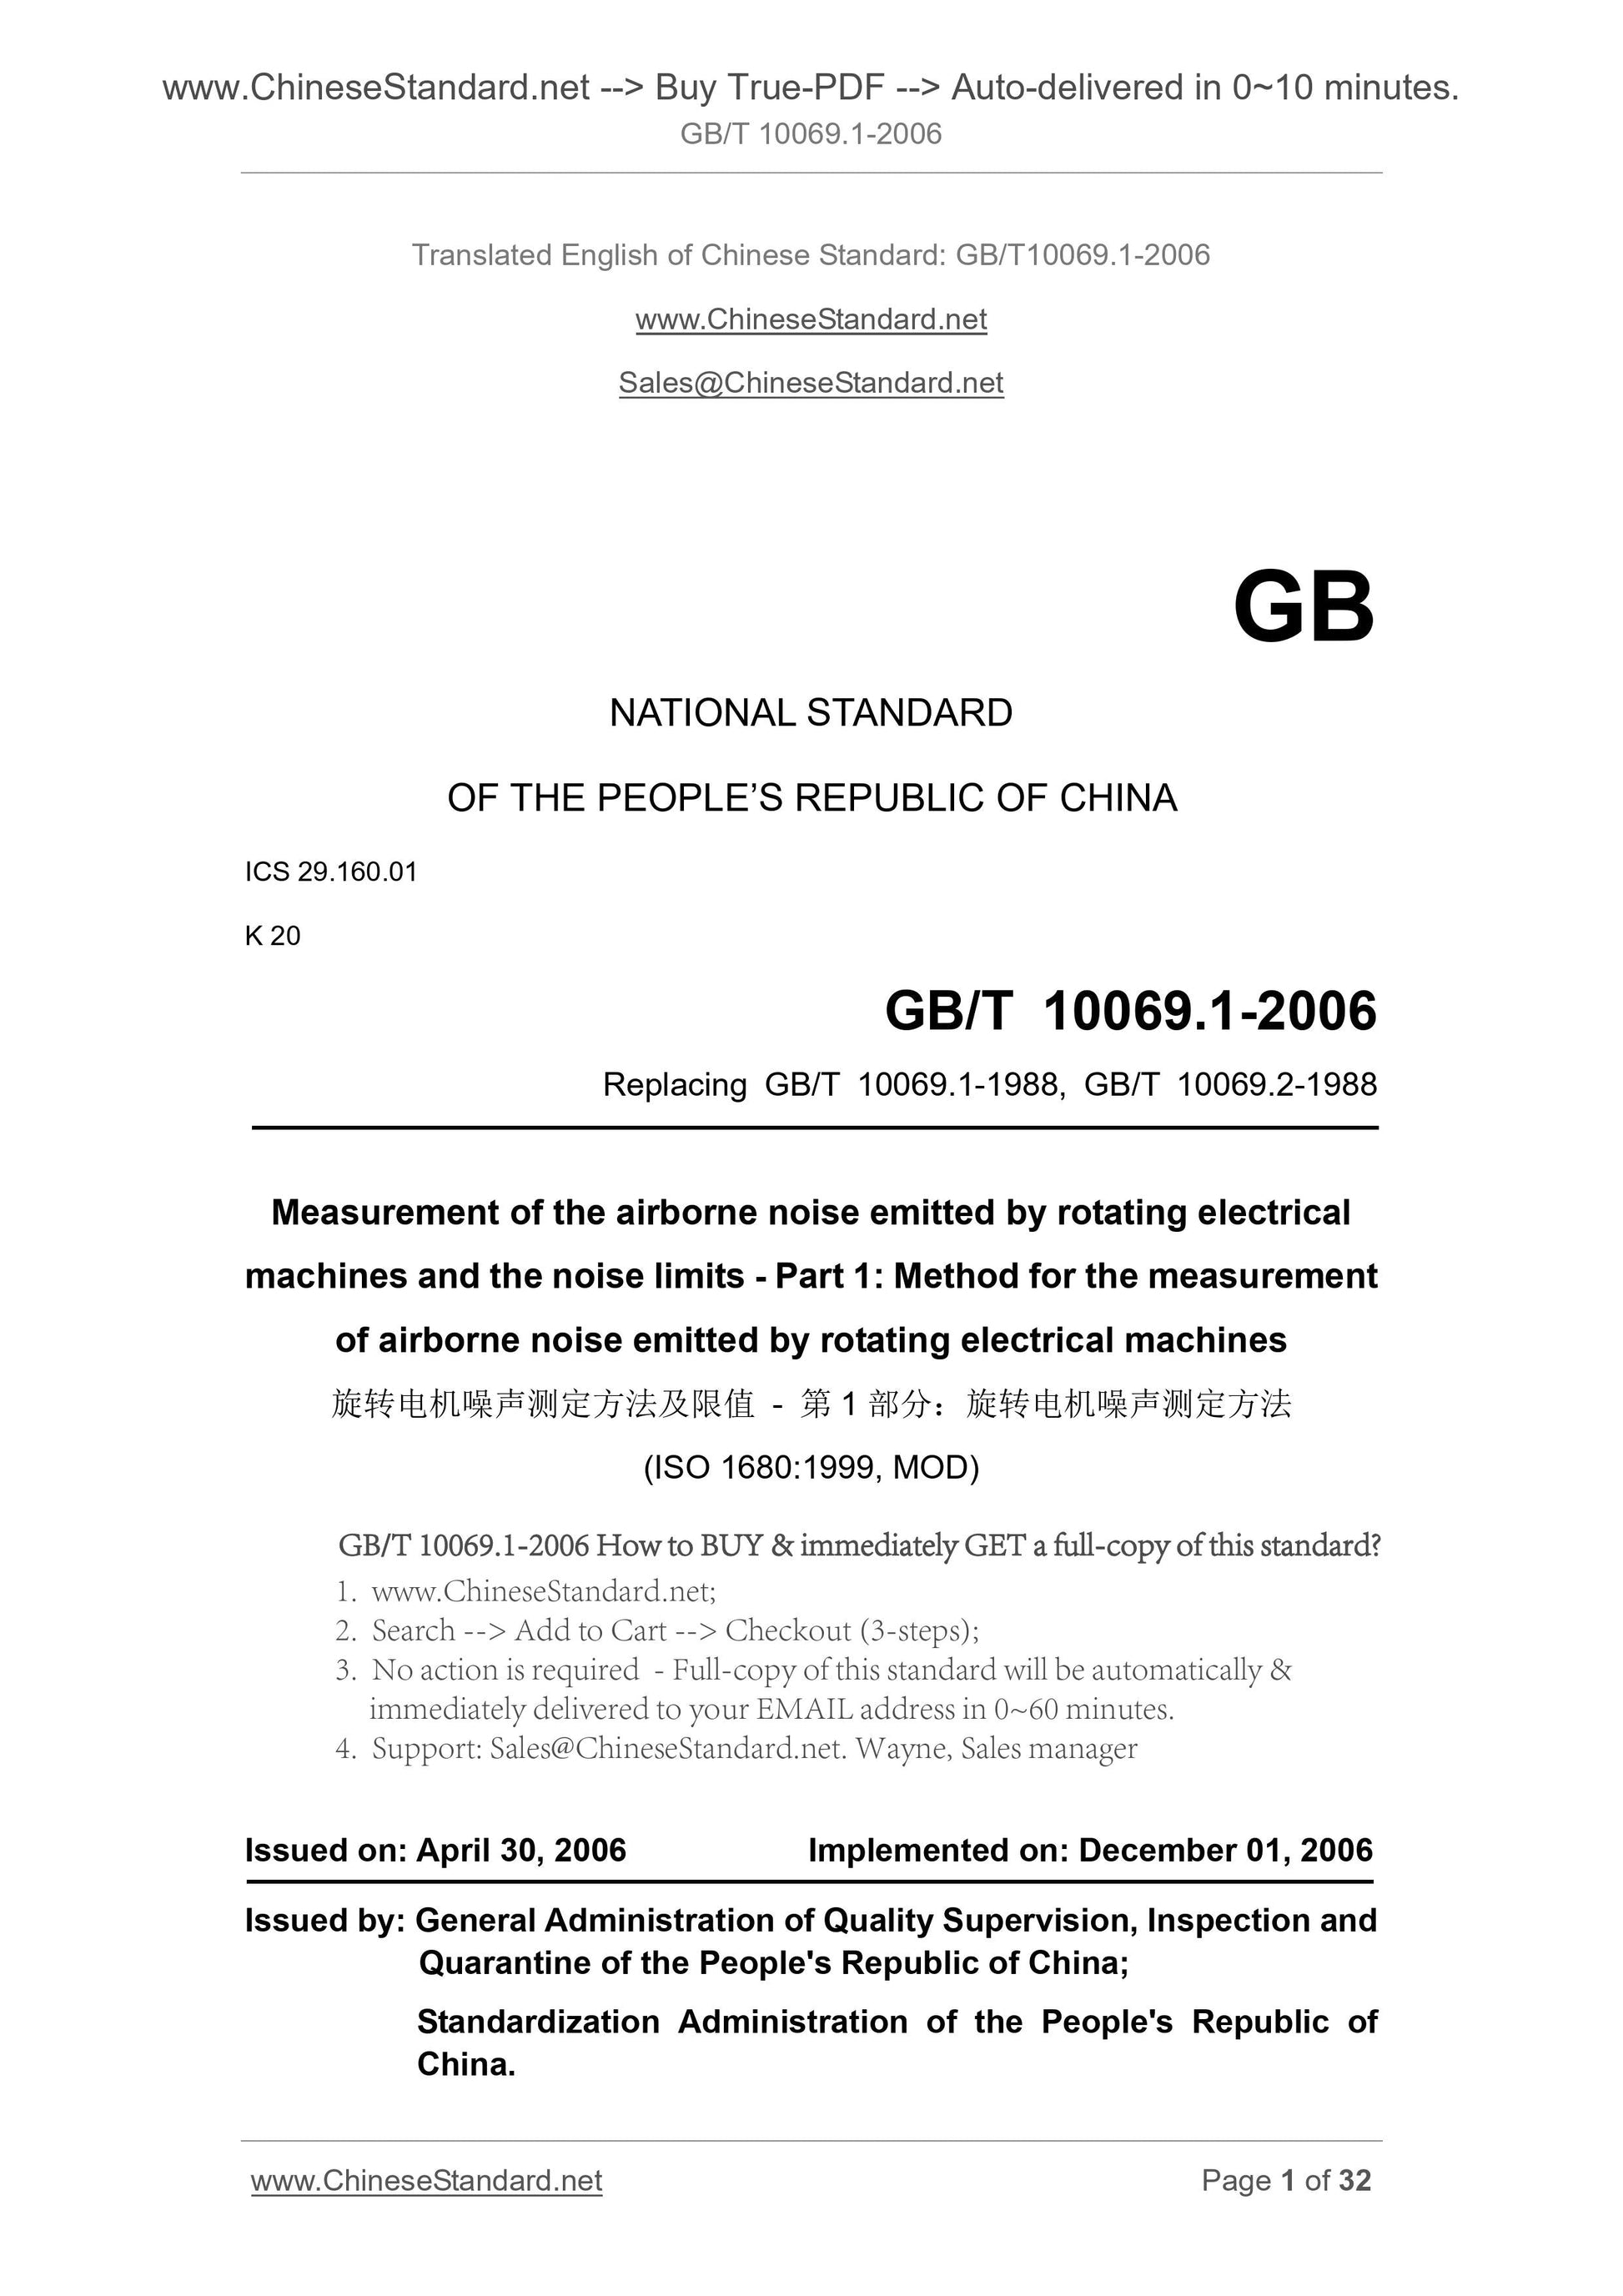 GB/T 10069.1-2006 Page 1